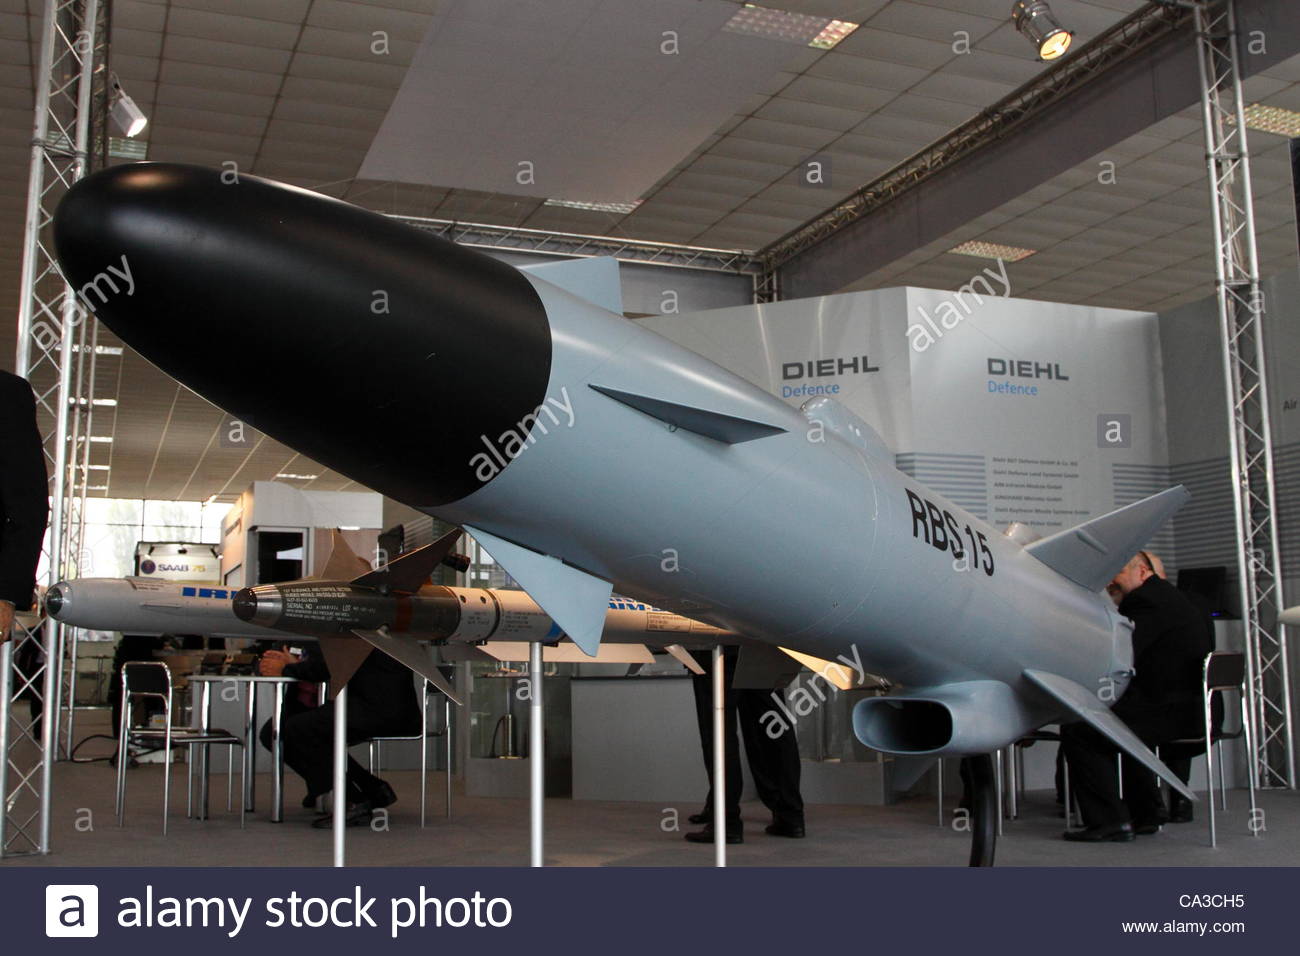 the-saab-rbs-15-cruise-missile-improved-version-produced-by-the-german-CA3CH5.jpg